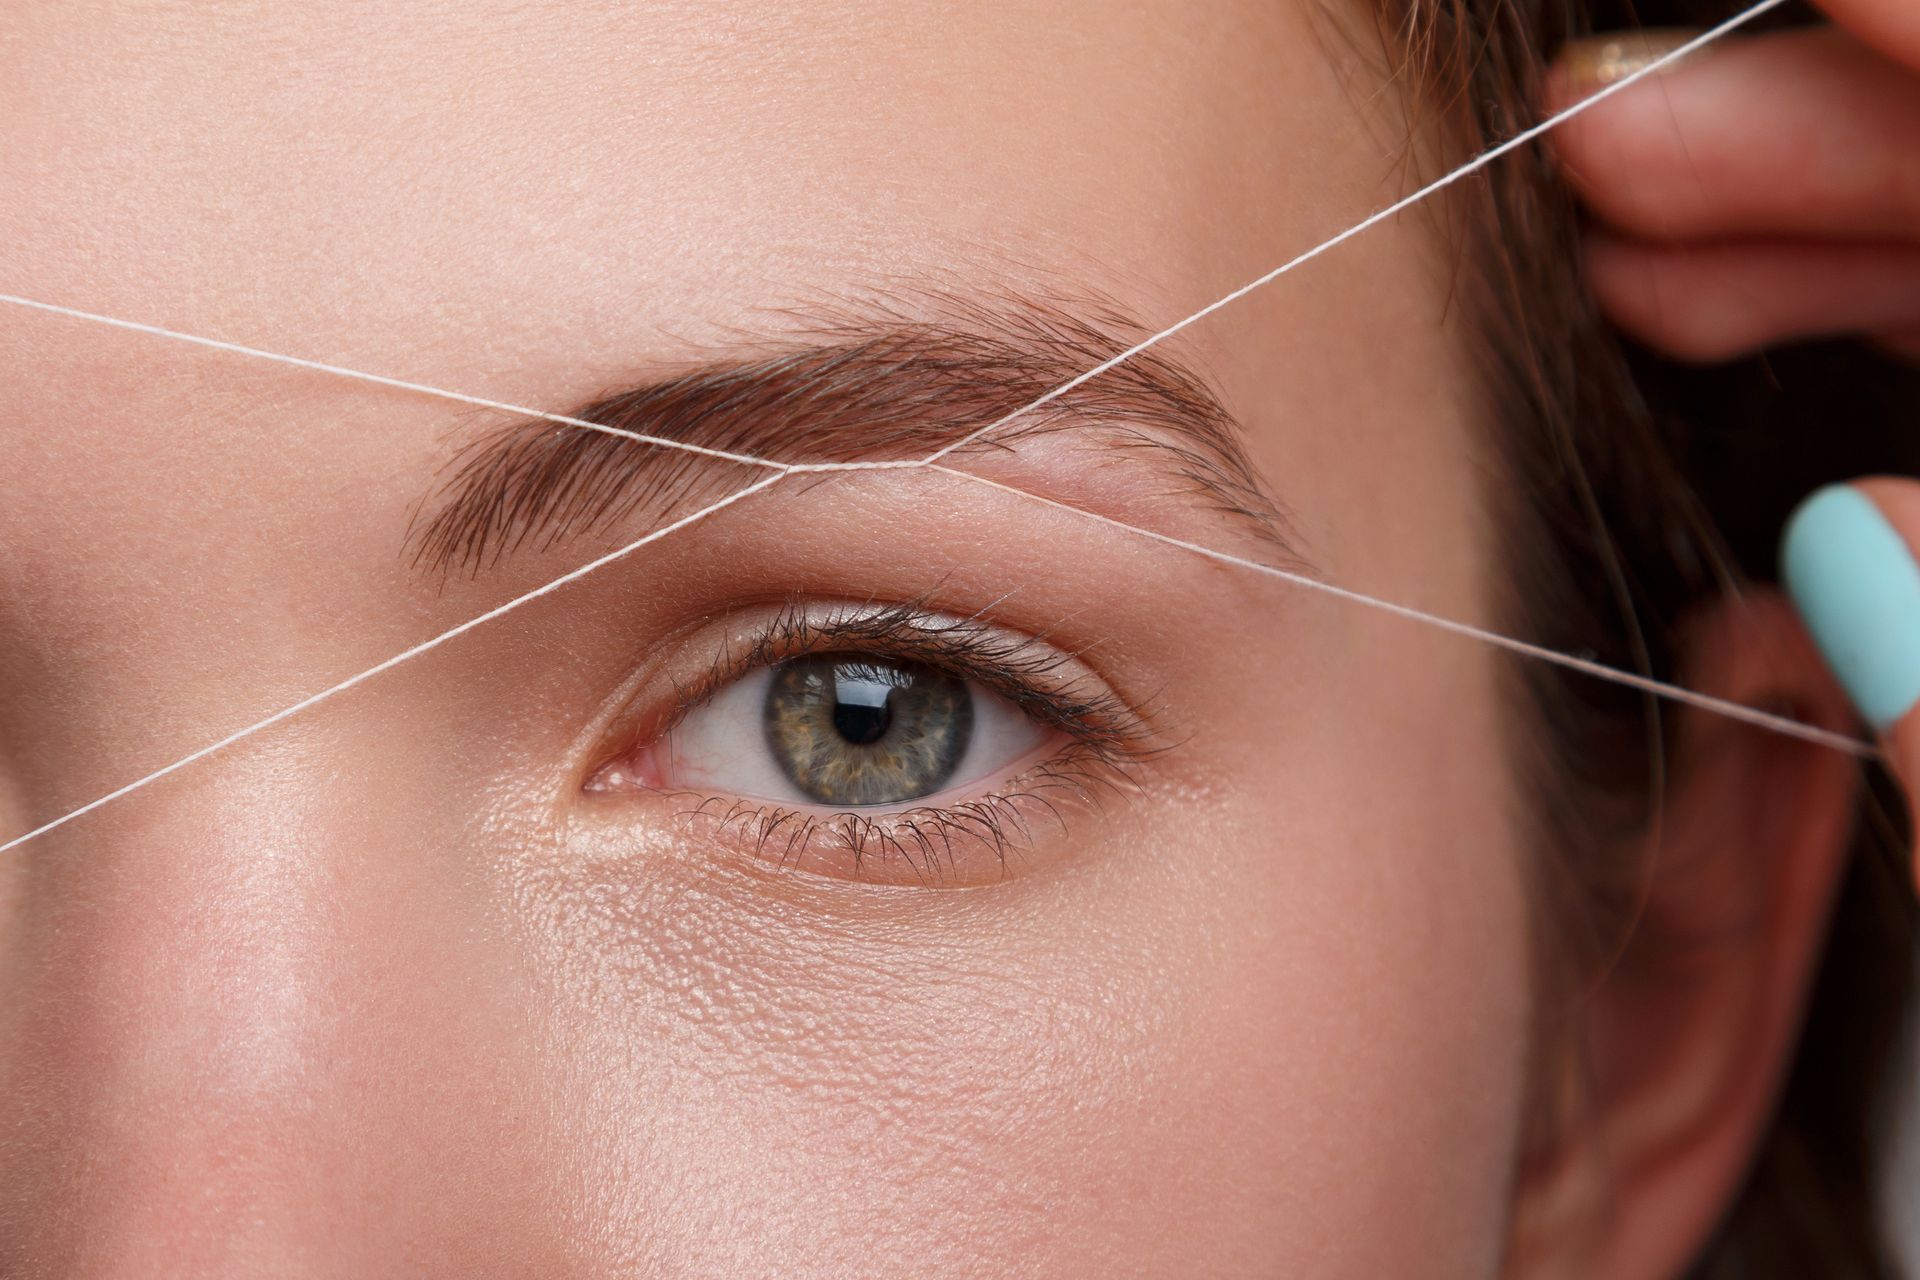 a woman has her eyebrows threaded with a string